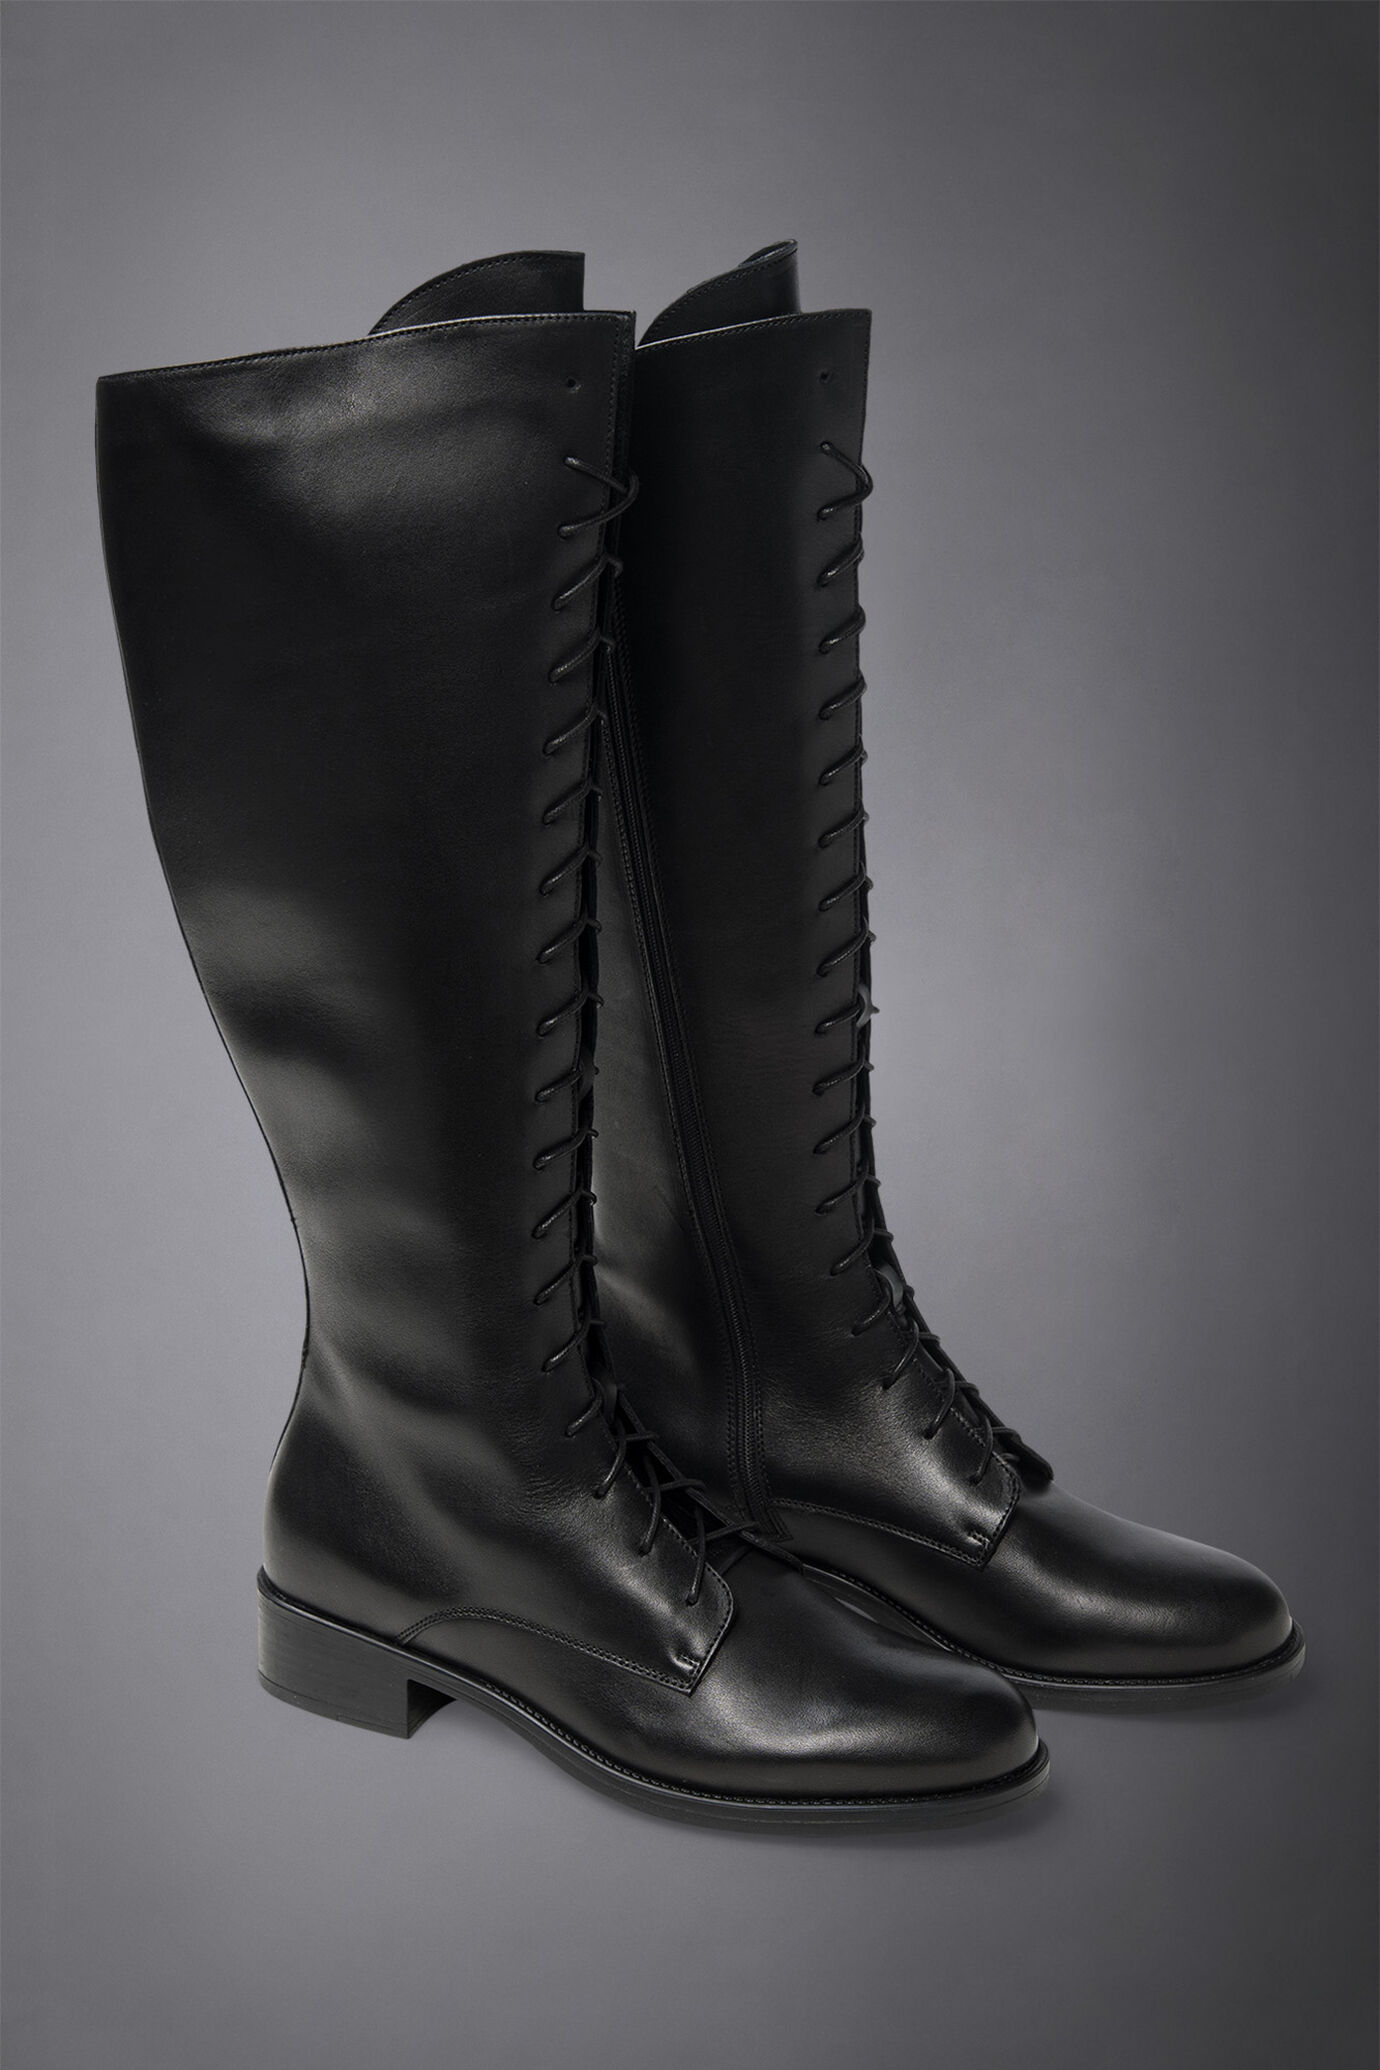 Women's 100% leather boot with rubber sole